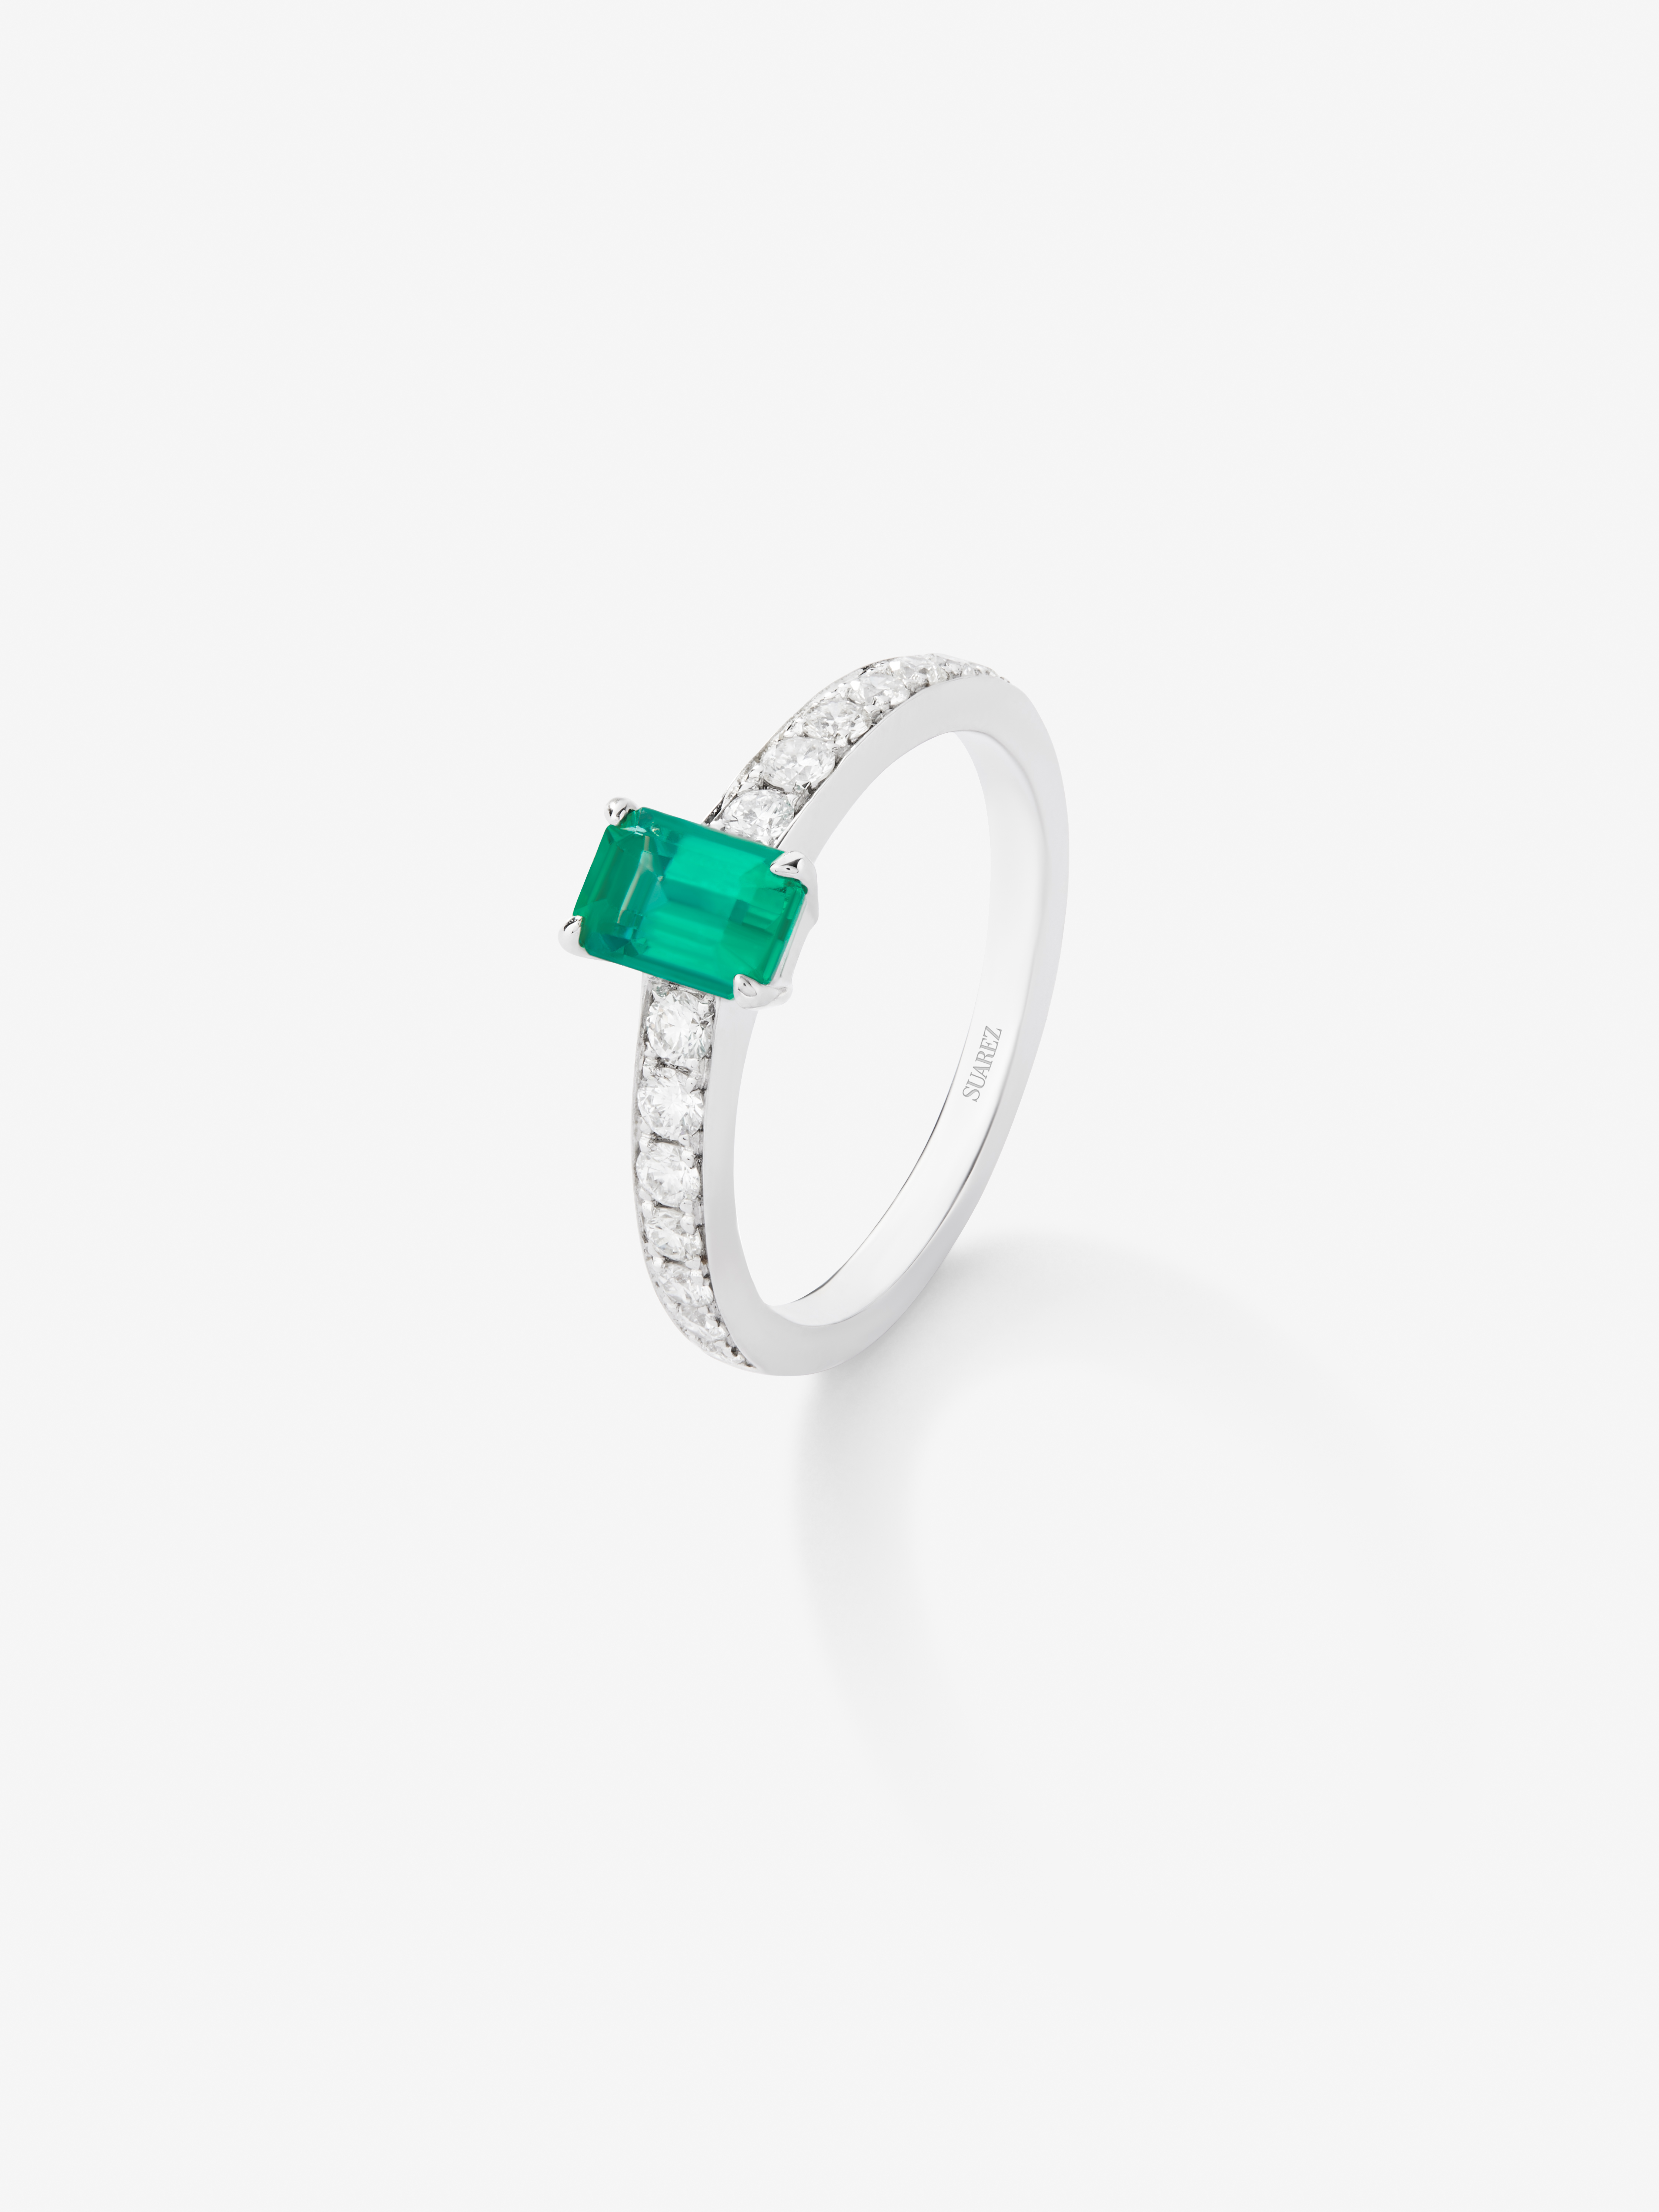 18K White Gold Ring with Green Esmerald in Emerald Size of 0.9 CTS and White Diamonds in Bright Size of 0.36 CTS